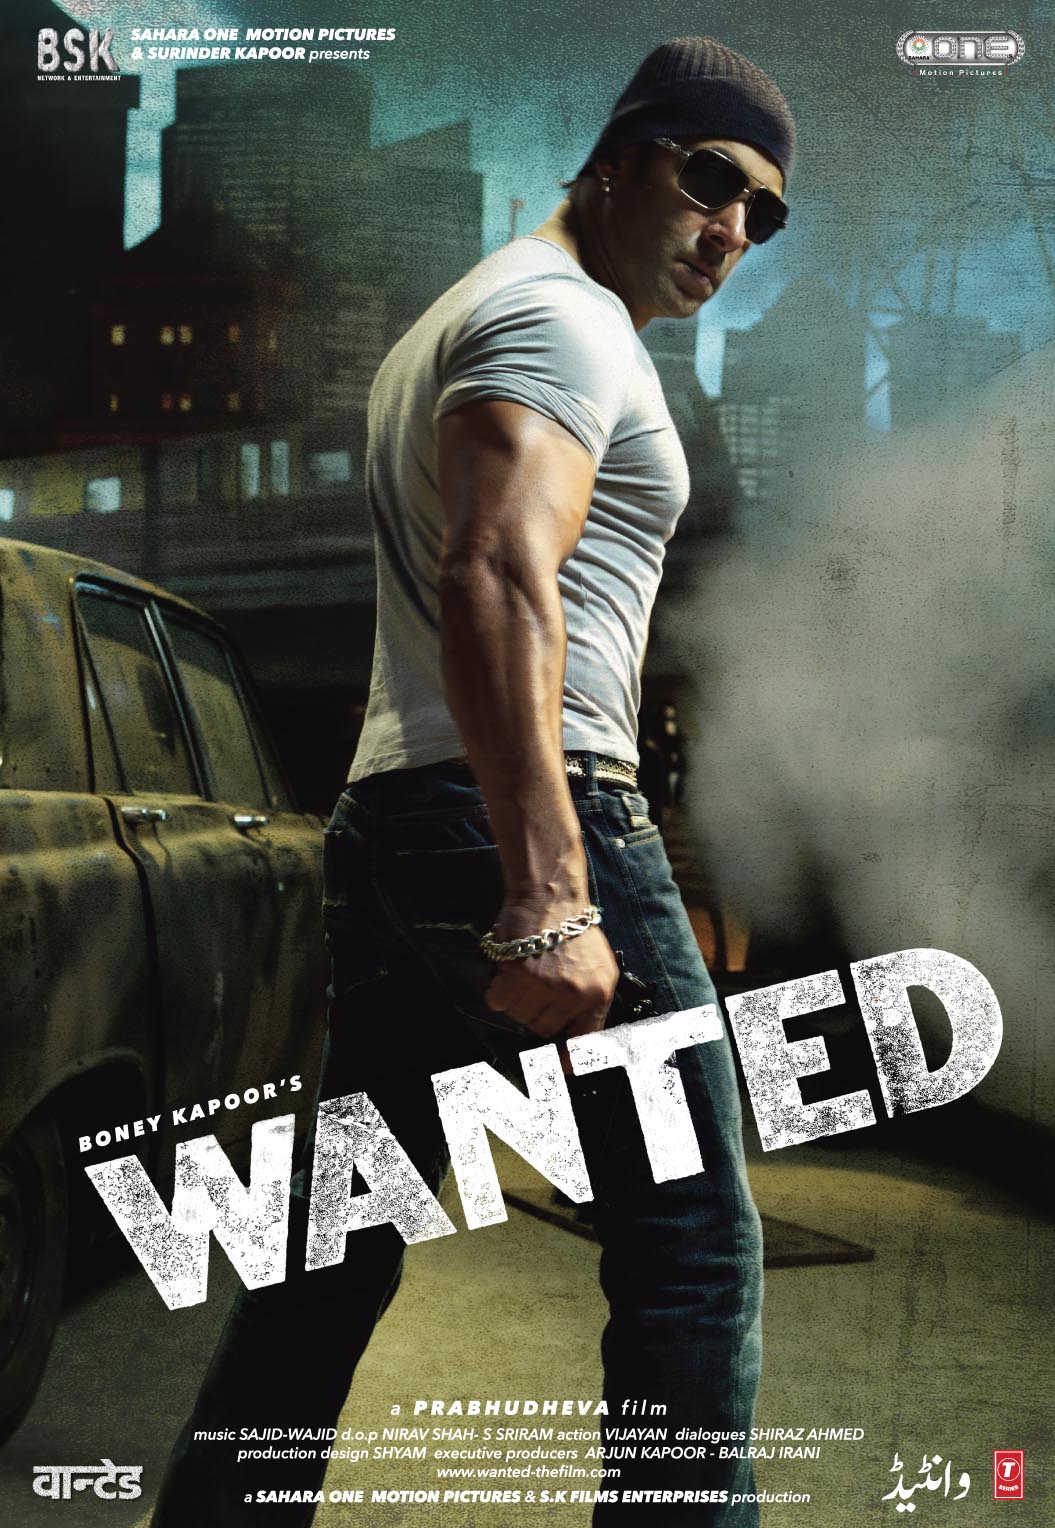 FULL MOVIE: Wanted (2009) [Action]